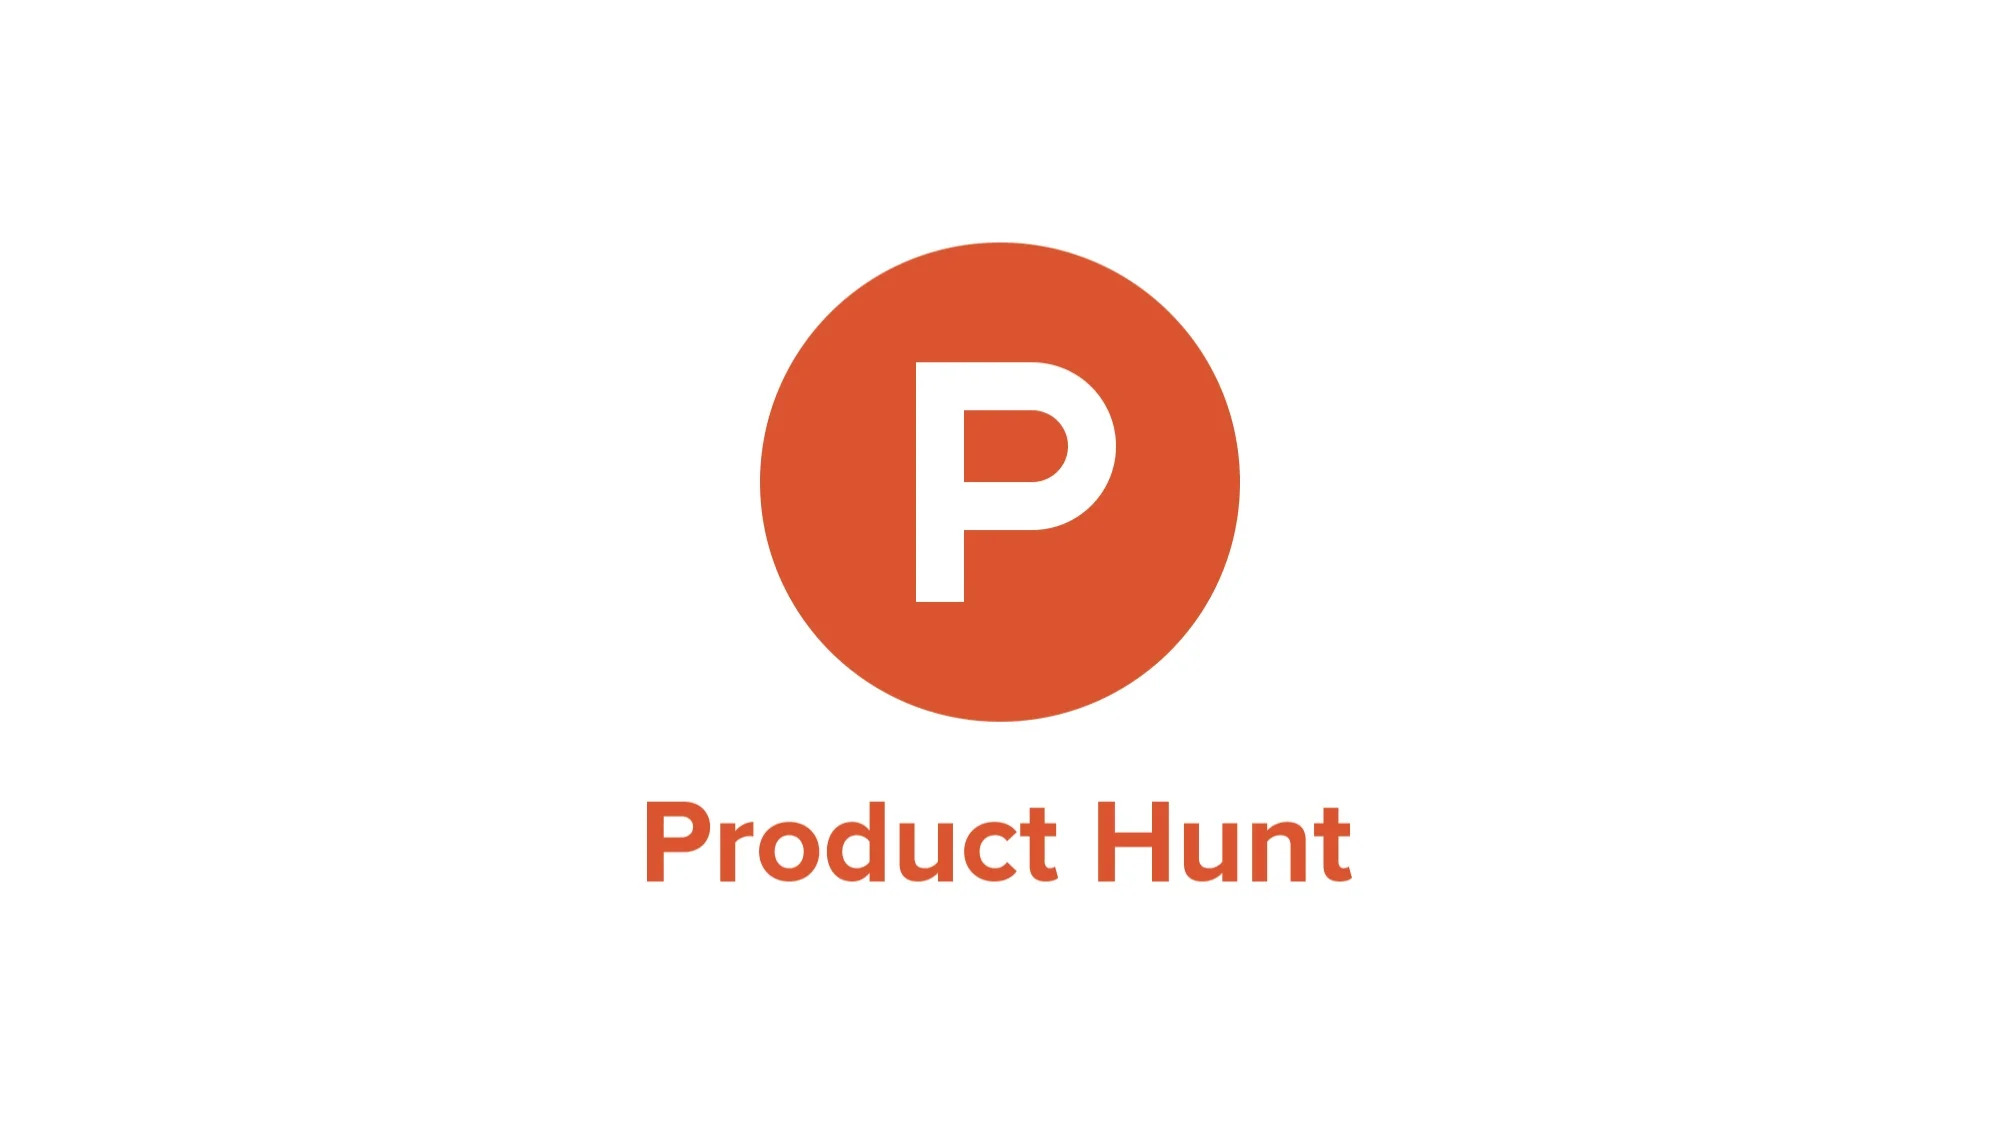 20-facts-about-product-hunt